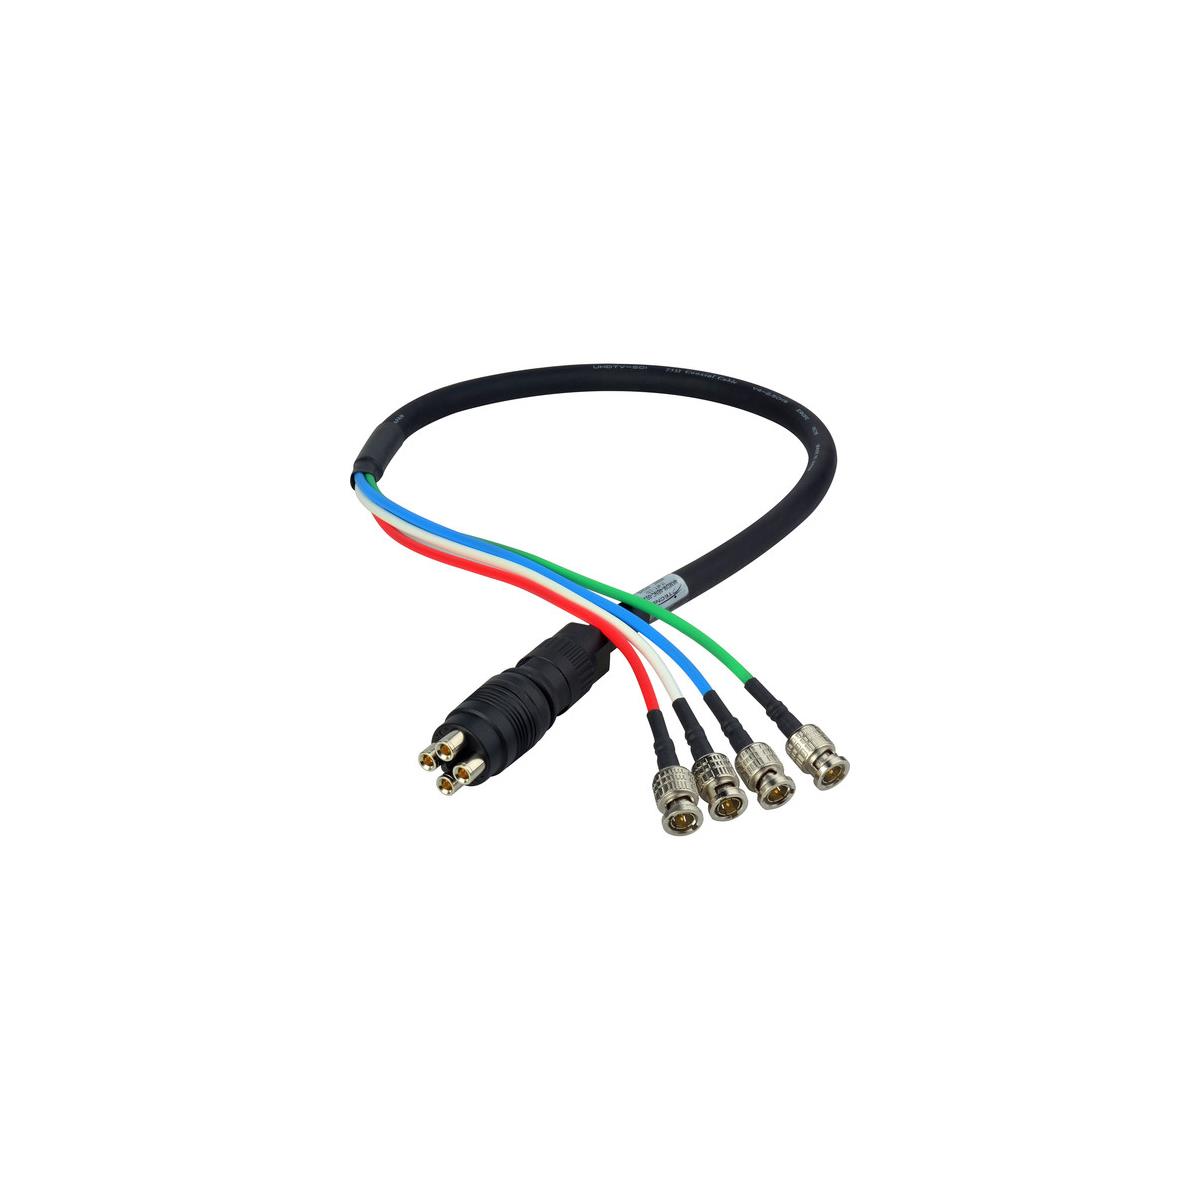 Laird 6' 4K UHD 3G HD-SDI 4-Channel DIN Male to BNC Camera Breakout Cable <b> 4-3G HD-SDI Signal Channel Quick Connect System for 4K/UHD Video Formats </b>One step, quick-connect Laird coax Canare cable assemblies connect 4 channels of 3G HD-SDI signals for 4K/UHD video formats. The Laird cables are assembled with Canare 4 channel, V4-2.5CHW flexible coaxial cable, allowing a break out to 4 Canare BNC or 4 DIN connectors. The Canare male connector, MDM-V4C25HW is designed to mate with the MDF-V4JRU panel mount receptacle which features a 4 DIN pass-through on the back side to increase your connectivity but not your rack space. Laird 4K UHD Canare camera cables assemblies make quick work of keeping everything in line and organized. Available in a variety of lengths. Use with the Canare MDF-V4JRU 4K DIN 1.0/2.3 4-channel chassis mount connector.• Quick connect and disconnect• Multiple 3G-SDI signals to 4K/UHD formats• Canare cable with solid and lightweight nylon resin body• Push-pull locking Canare coax connectors with protective rubber boots• High performance Canare BCP-B25HW BNC or 4 DCP-C25HD DIN connectors• Made in the USA in a Canare trained fiber shop• Canare V4-2.5CHW 4-Channel 4K 75Ohms Coaxial Cable• 4 DIN 1.0/2.3 connectors• MDF-V4JRU accepts MDM-V4C25HW and also DIN 1.0/2.3 plugs<b> Applications </b>• High density 3G-SDI• applications• Mobile trucks• Fly packs• Studios• 4K transmission• Consolidate HD-SDI lines